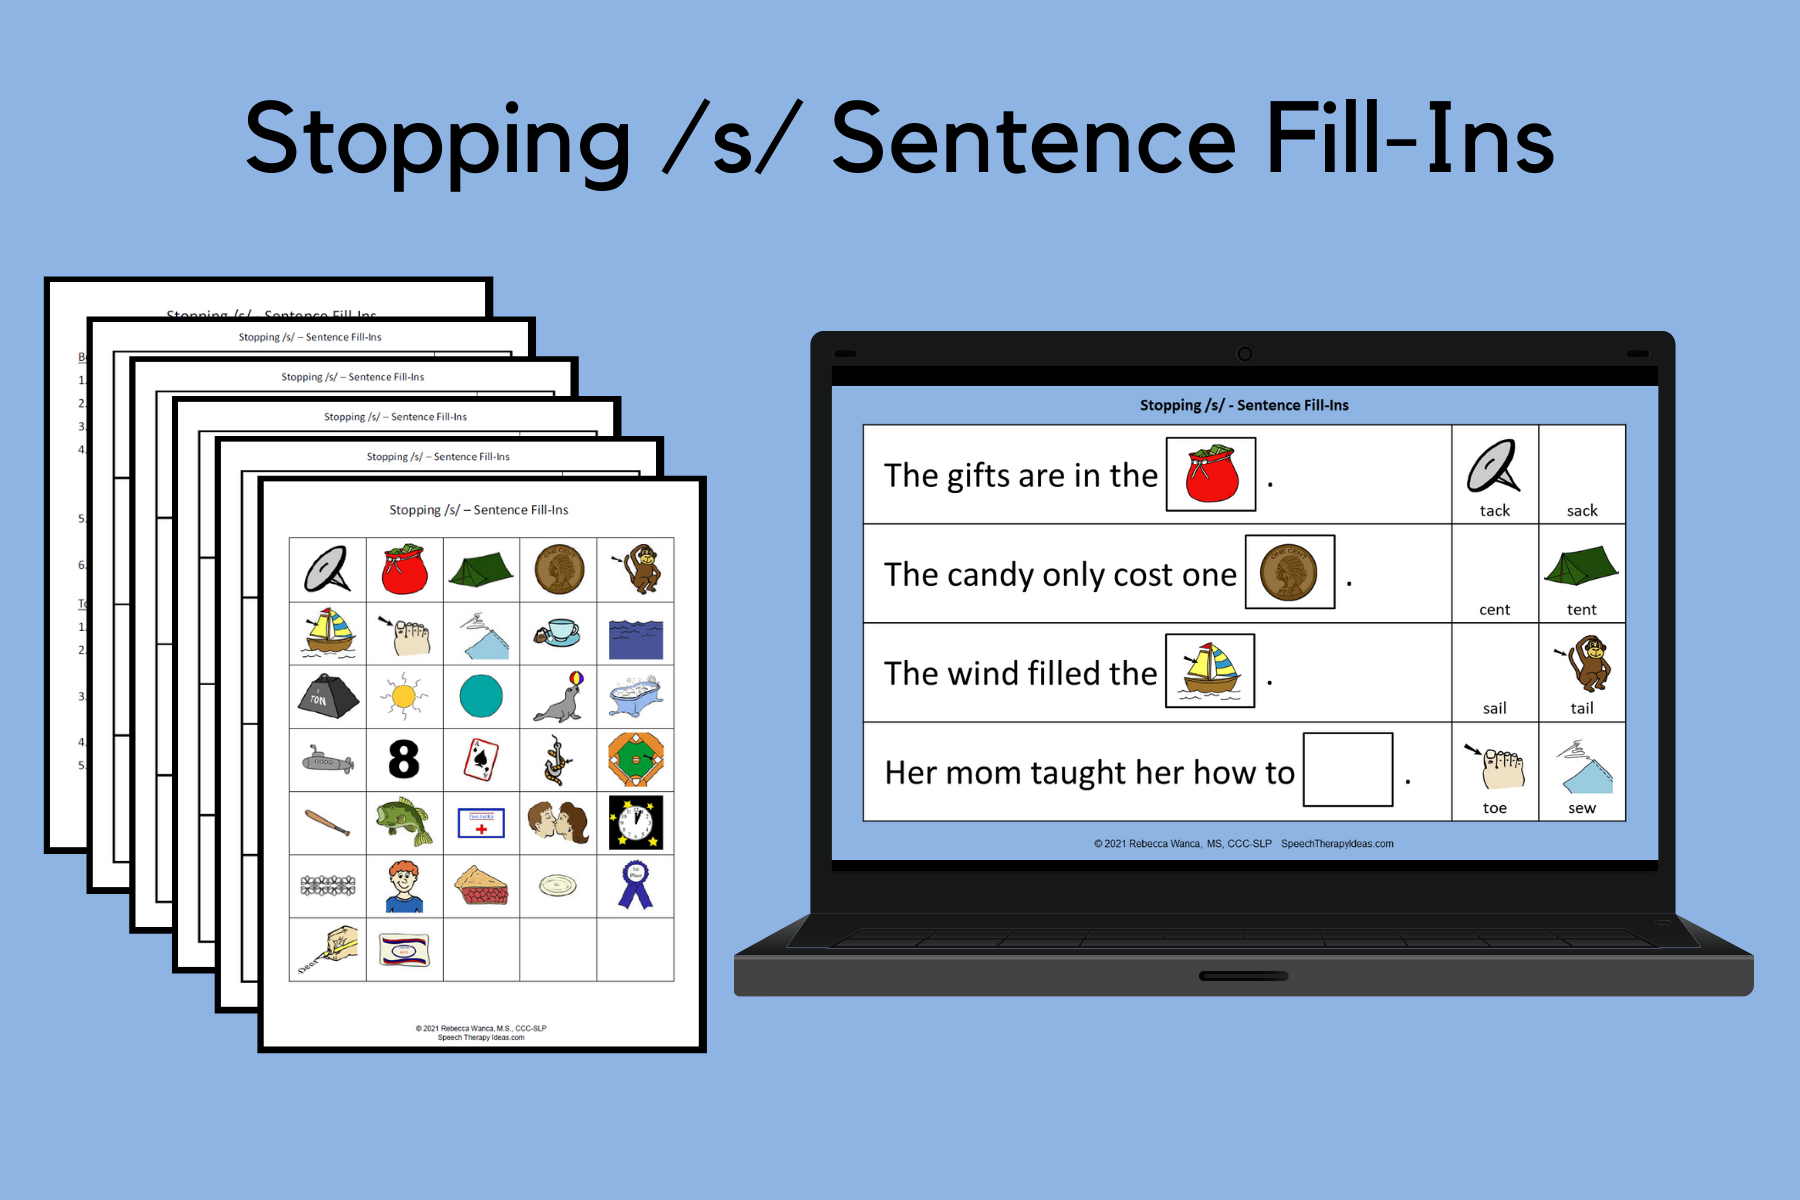 Stopping /s/ Sentence Fill-Ins